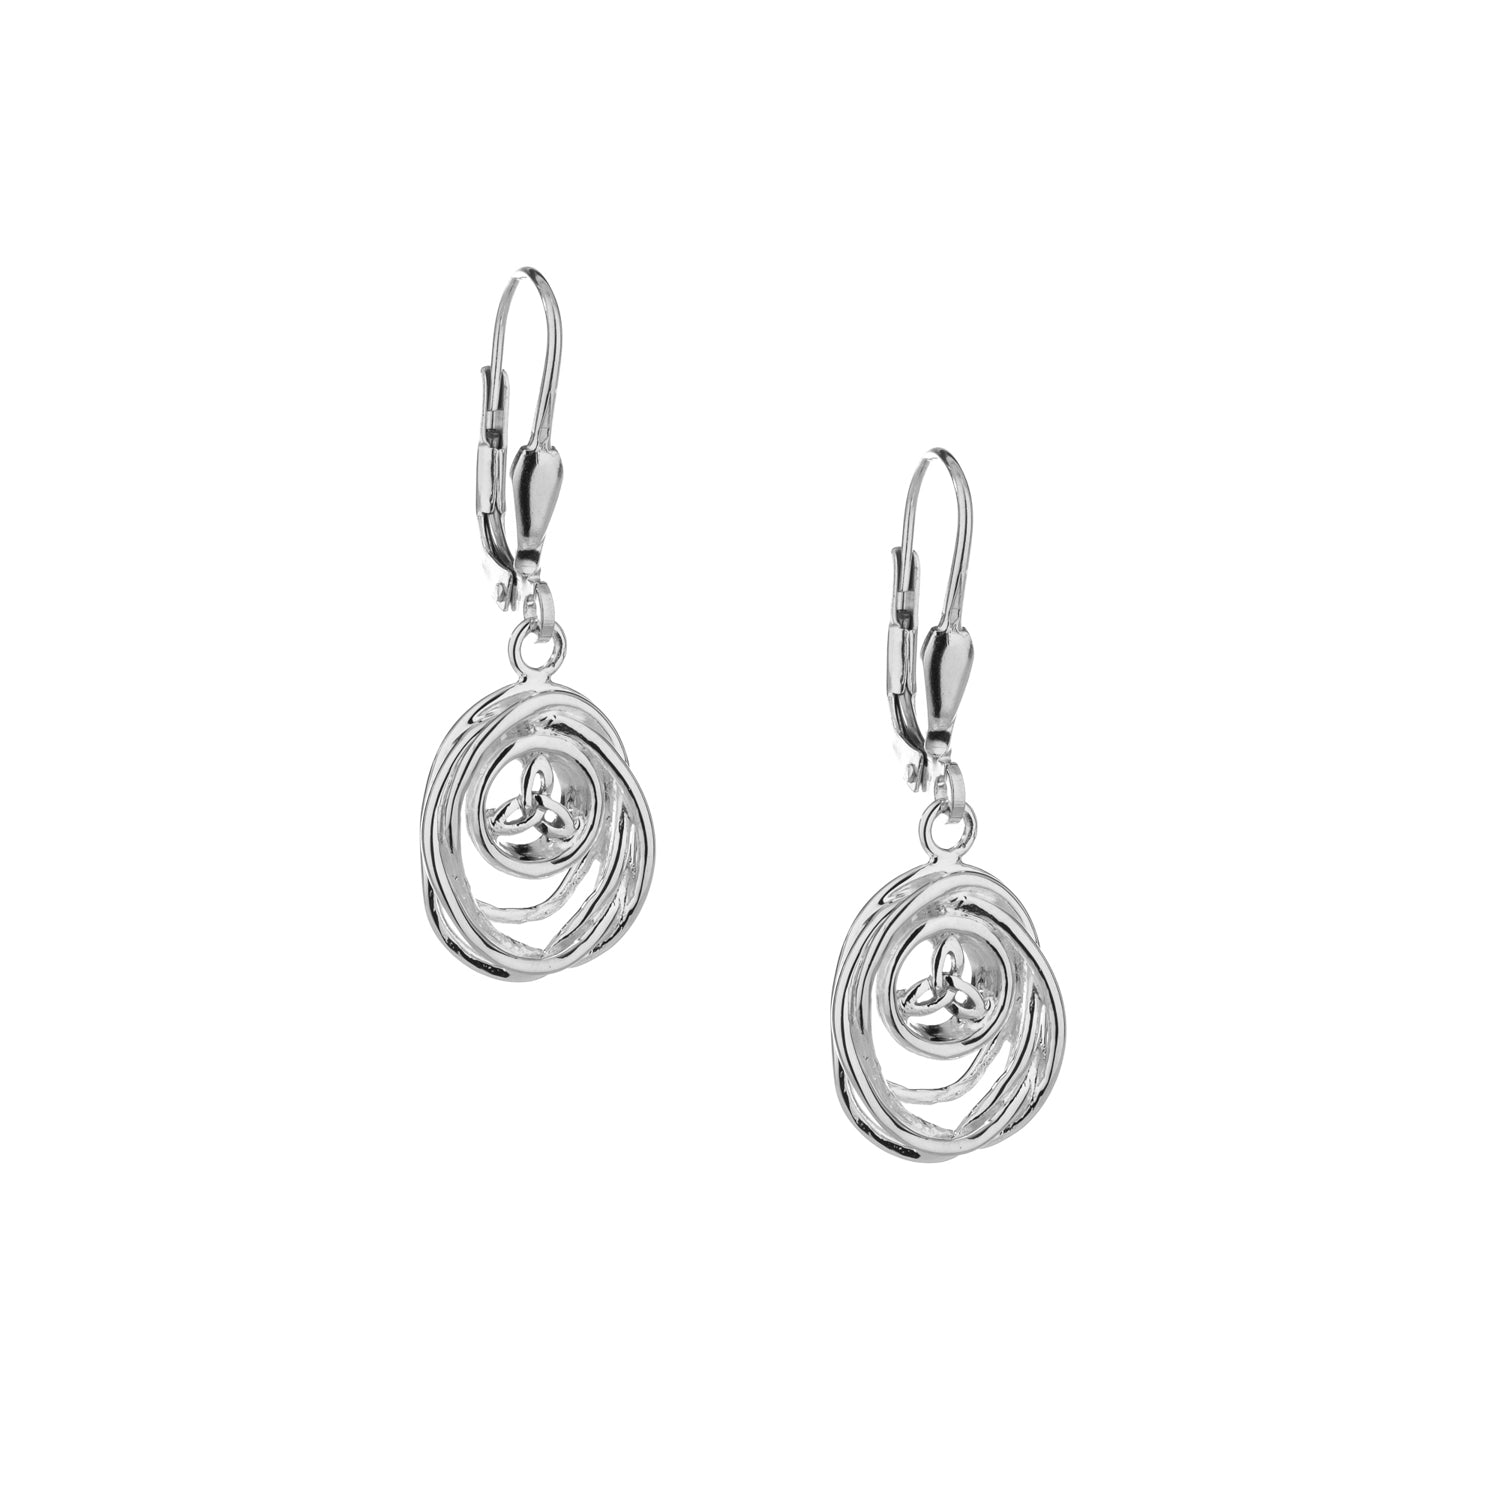 Earrings Celtic Cradle of Life Leverback Drop Earrings from welch and company jewelers near syracuse ny 